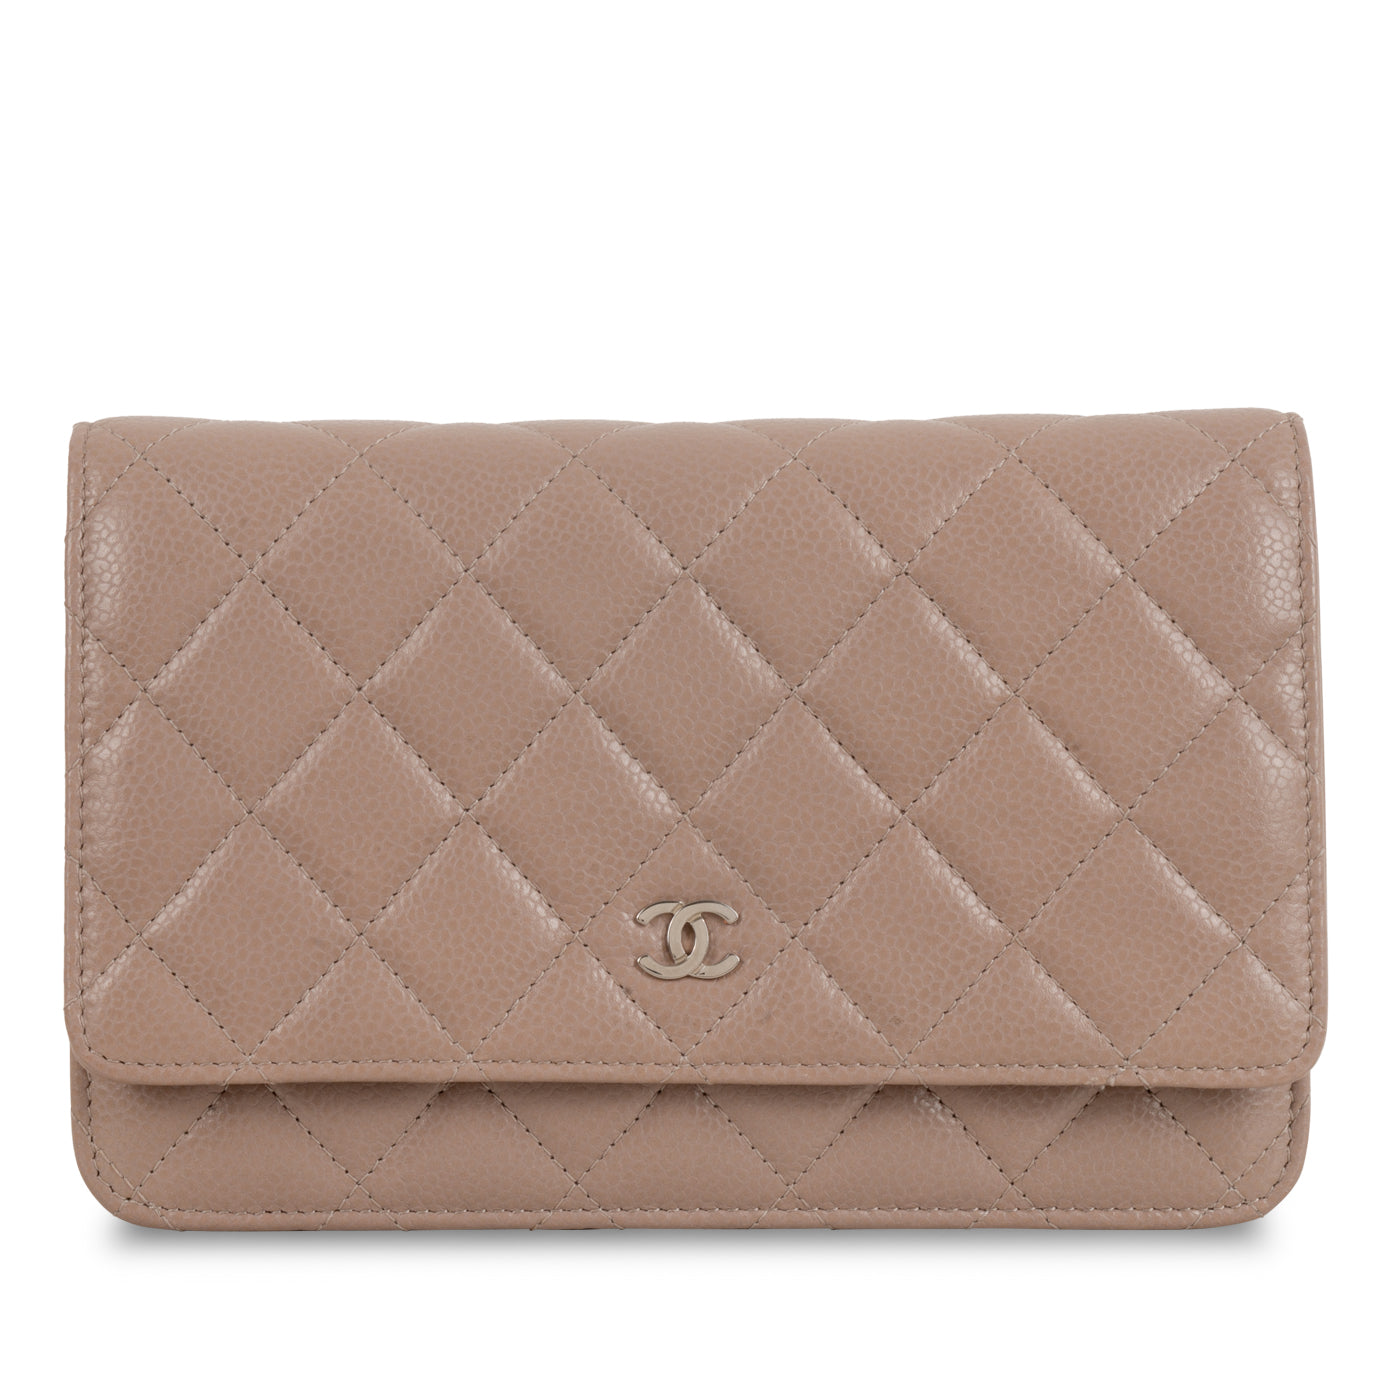 Chanel - Wallet on Chain - Nude - Pre Loved